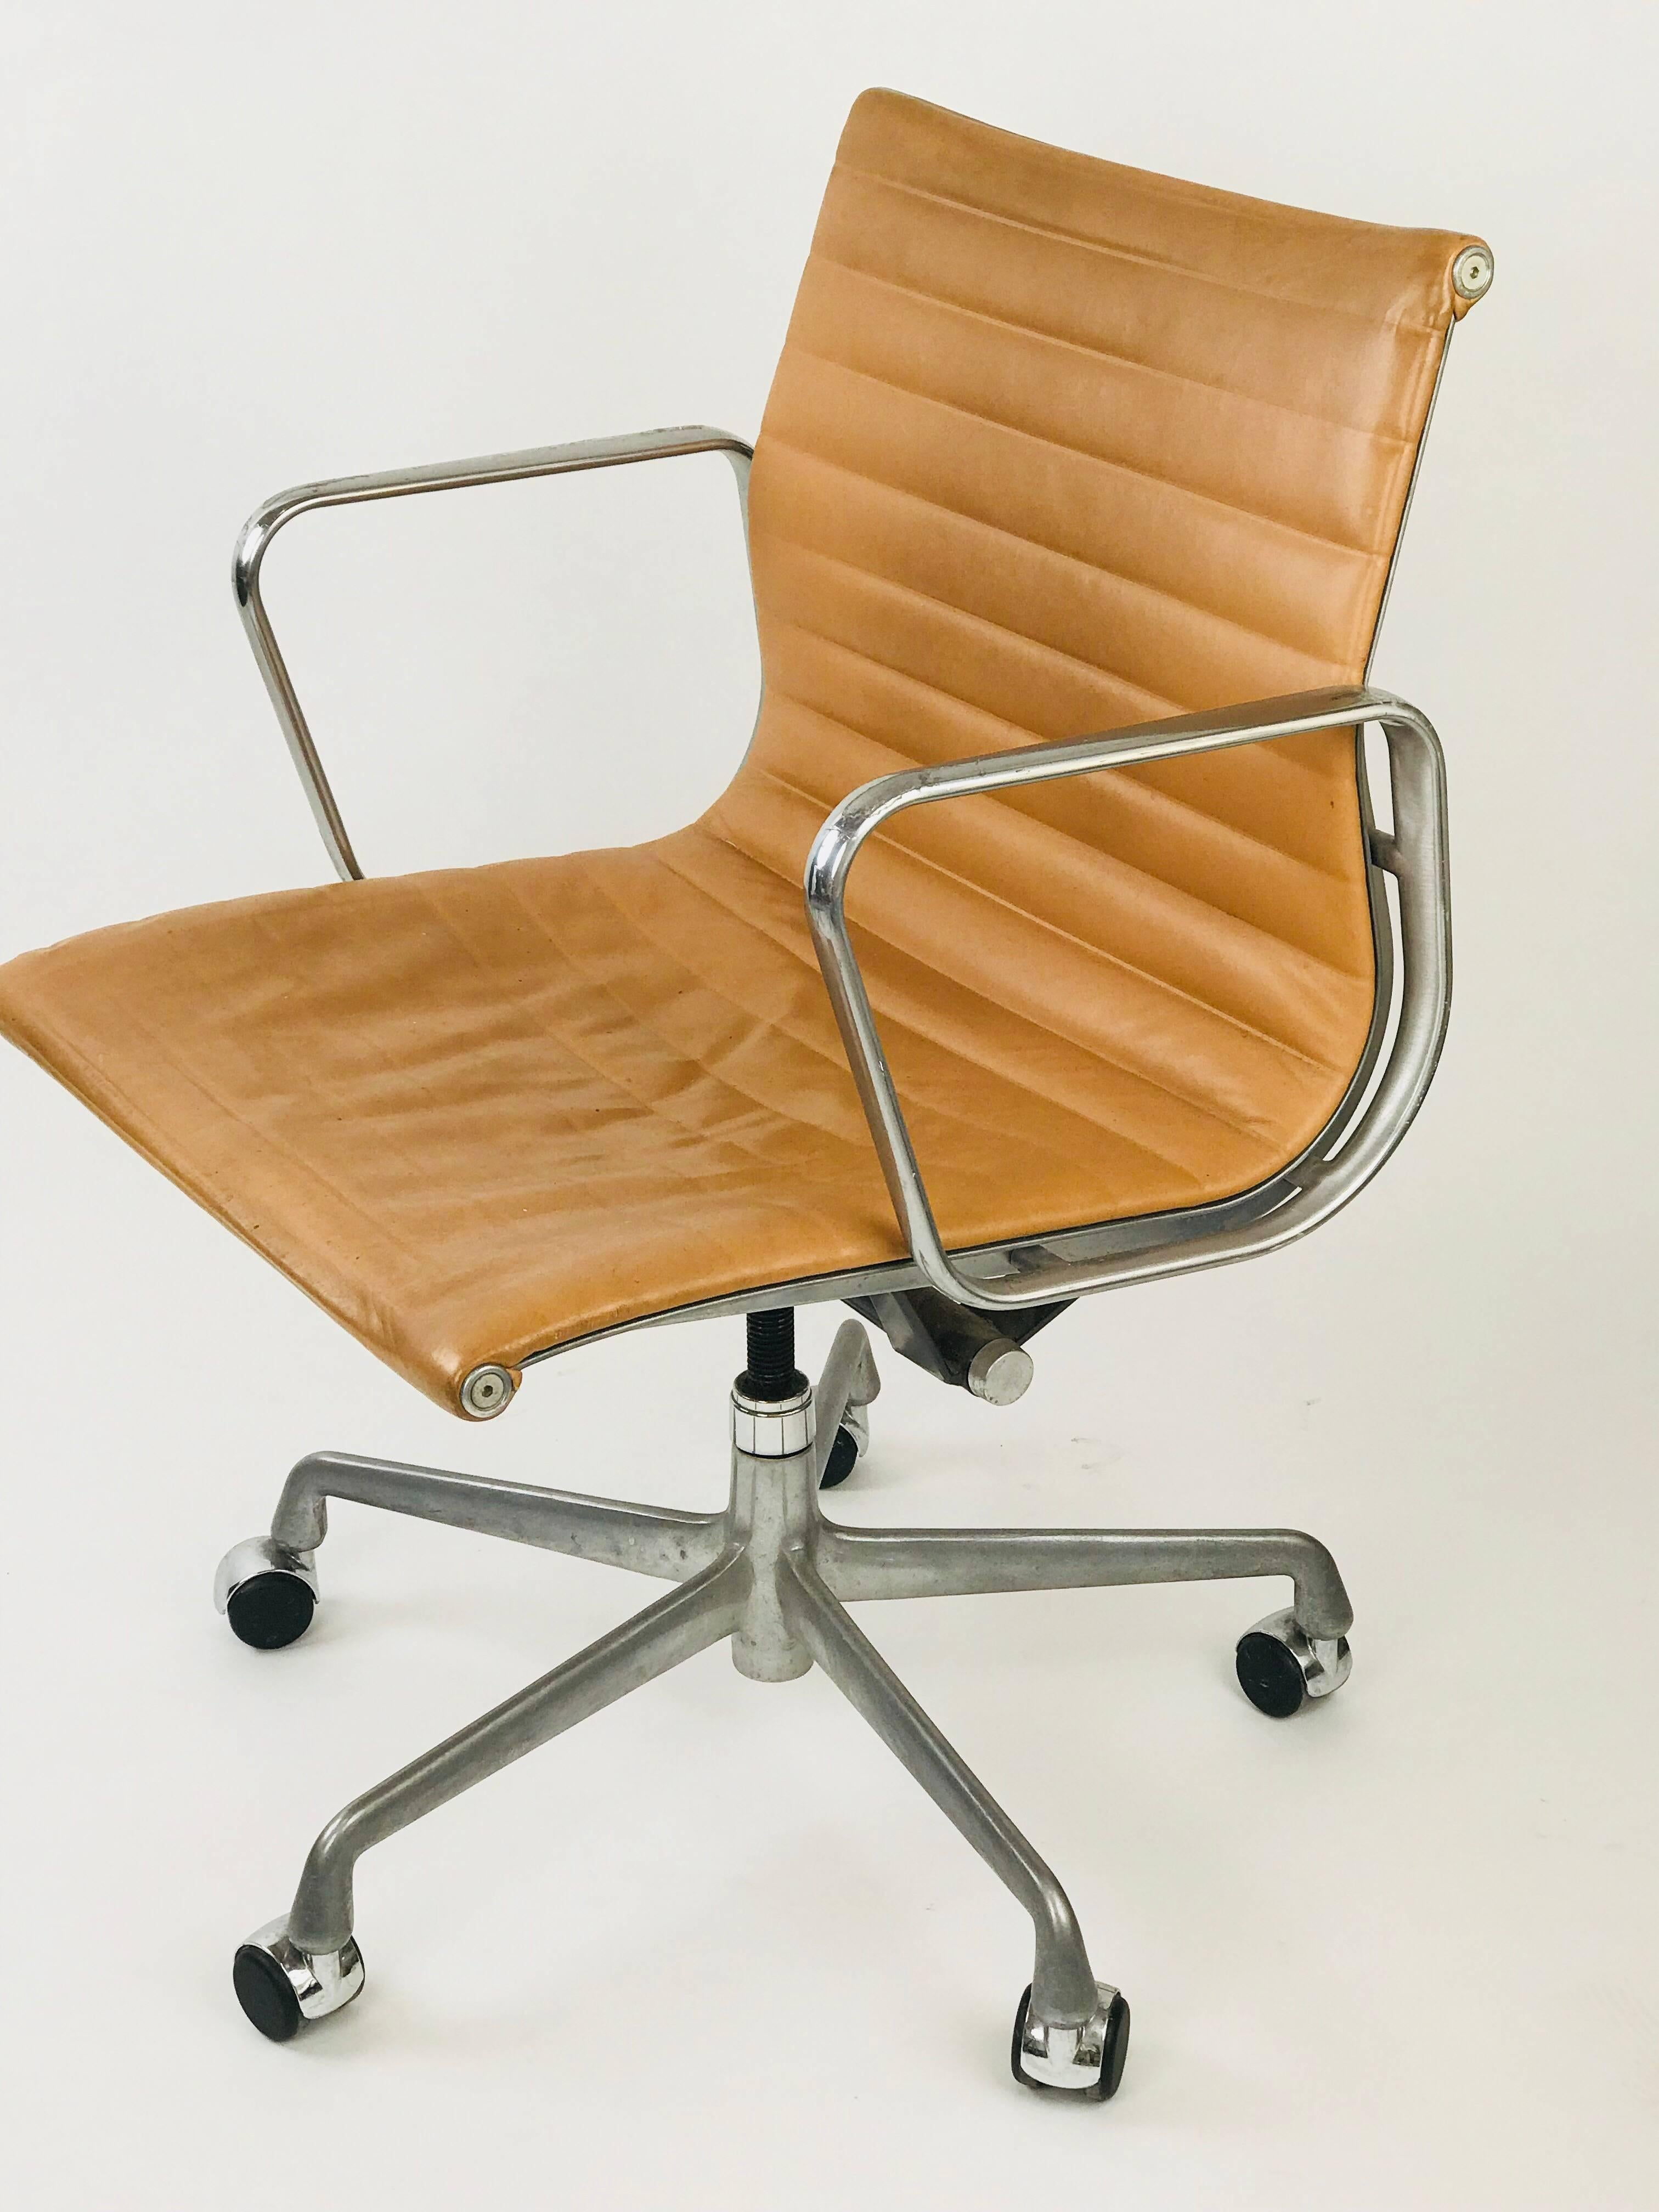 Eames management office chair designed by Charles Eames for Herman Miller in camel leather. Has a five-star base, spindle and tilt-swivel mechanism. It is in fair condition with some minor damage to the metal on the arms and a worn seat that adds to